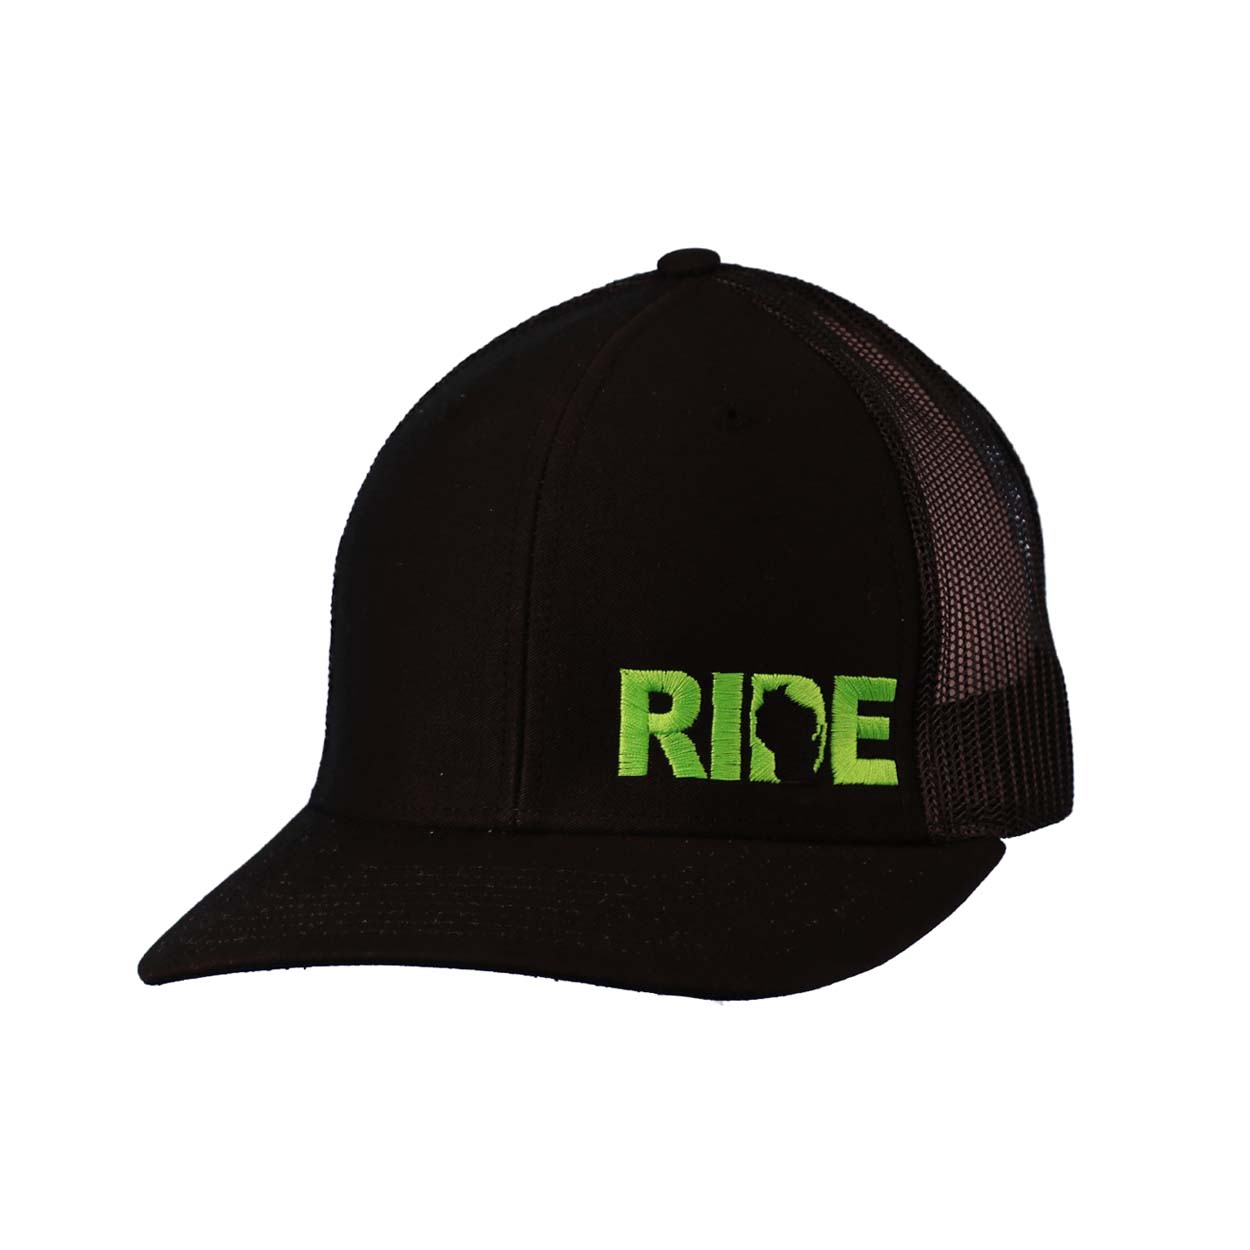 Ride Wisconsin Night Out Embroidered Snapback Trucker Hat Black/Green Green